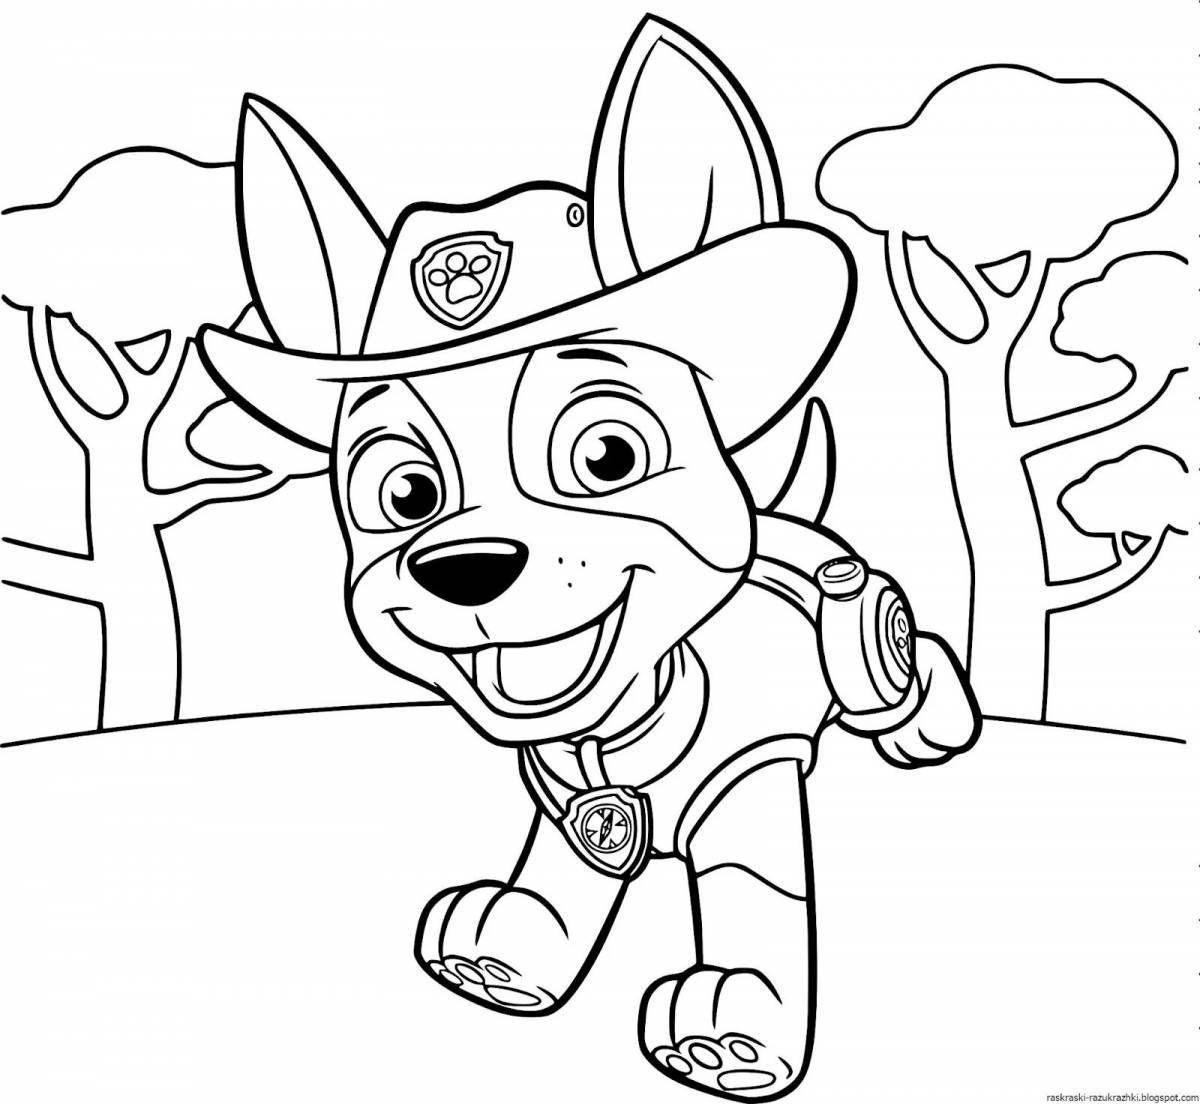 Fun coloring page paw patrol for kids 5-6 years old